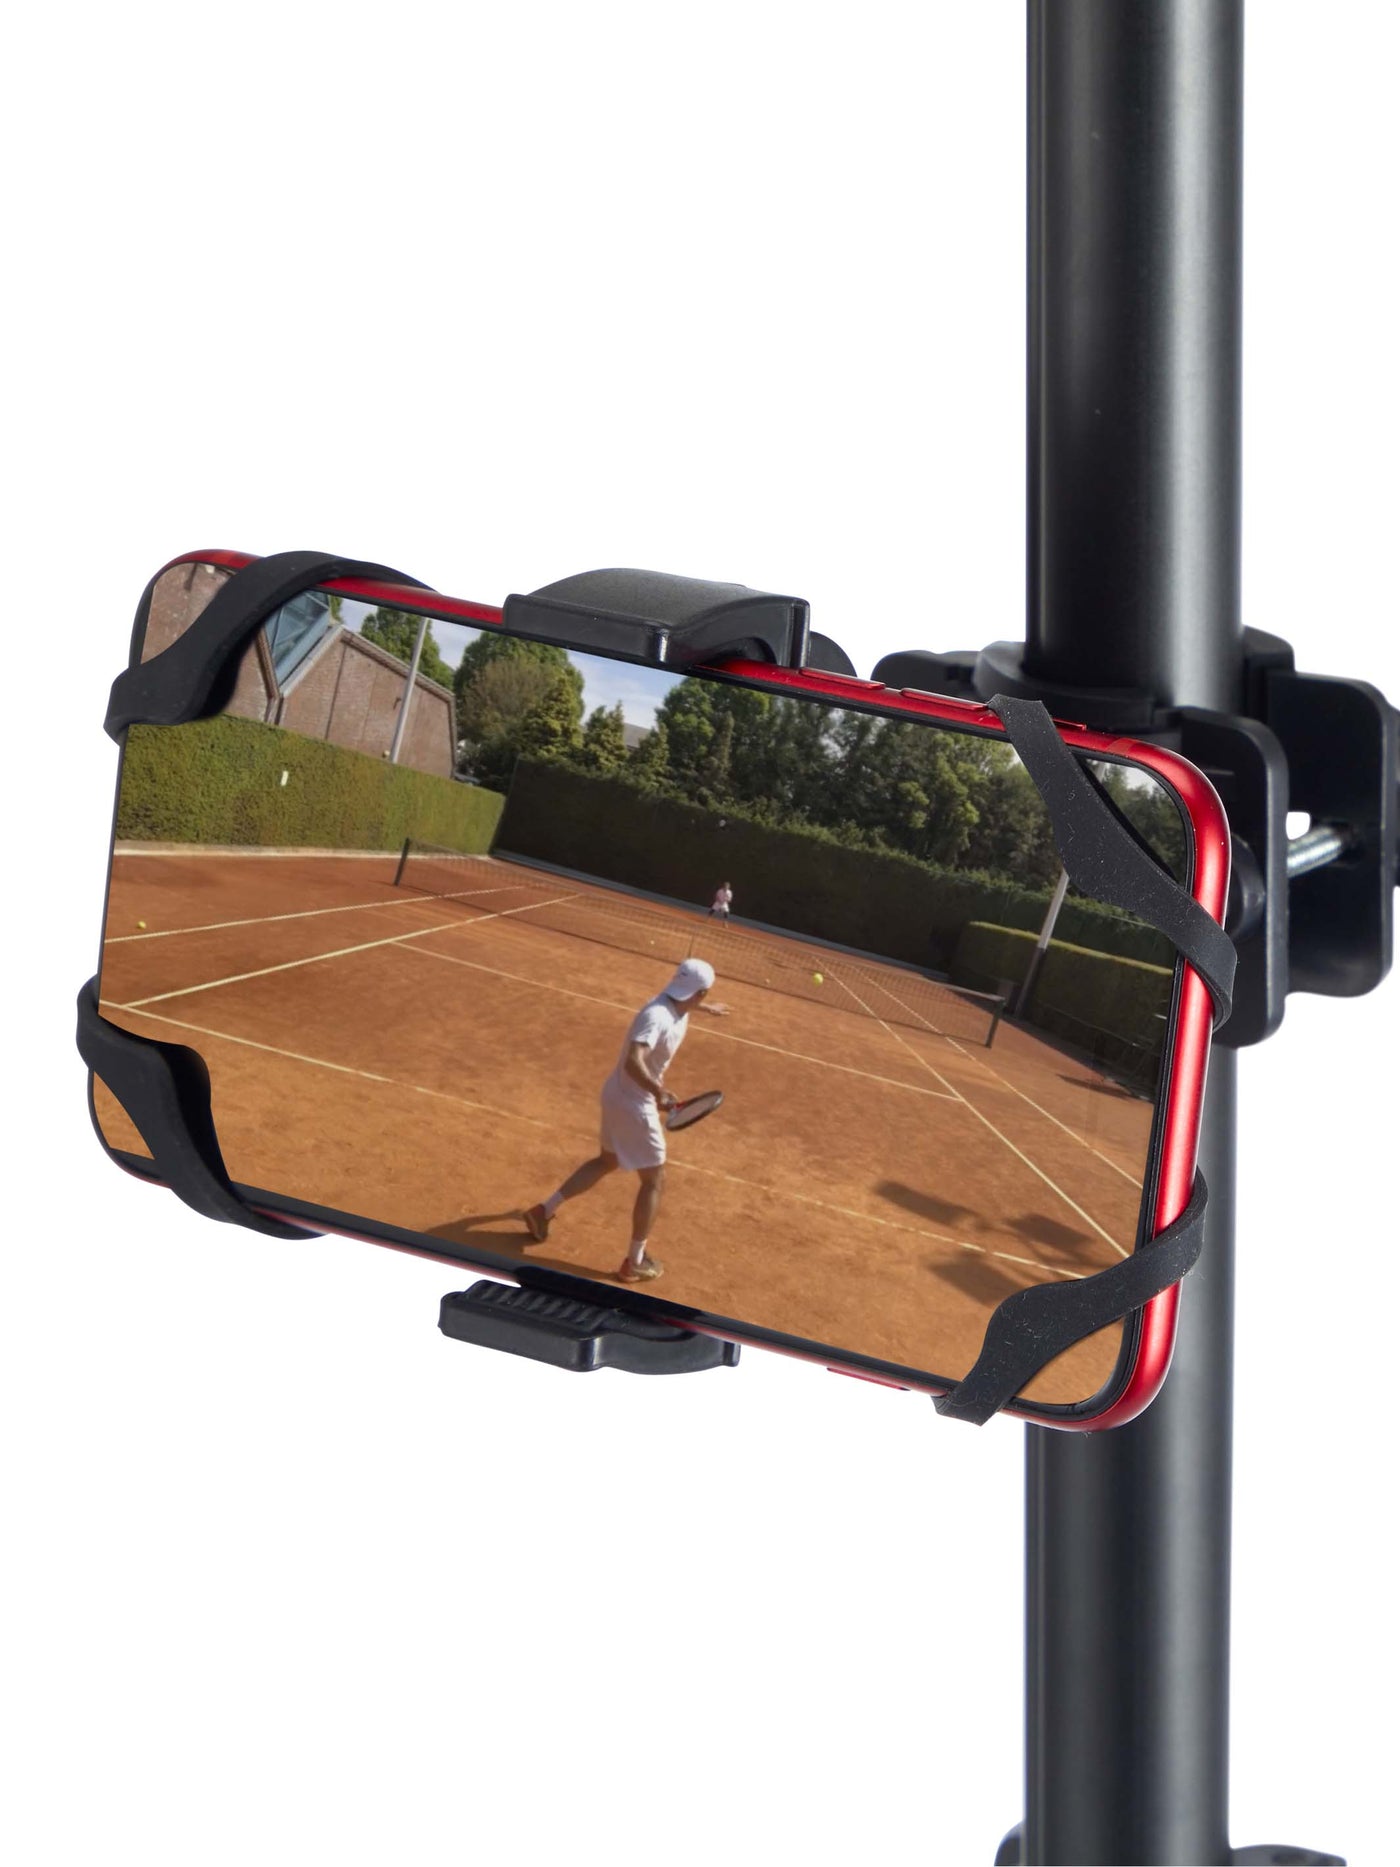 The New Functional Tennis Camera Mount